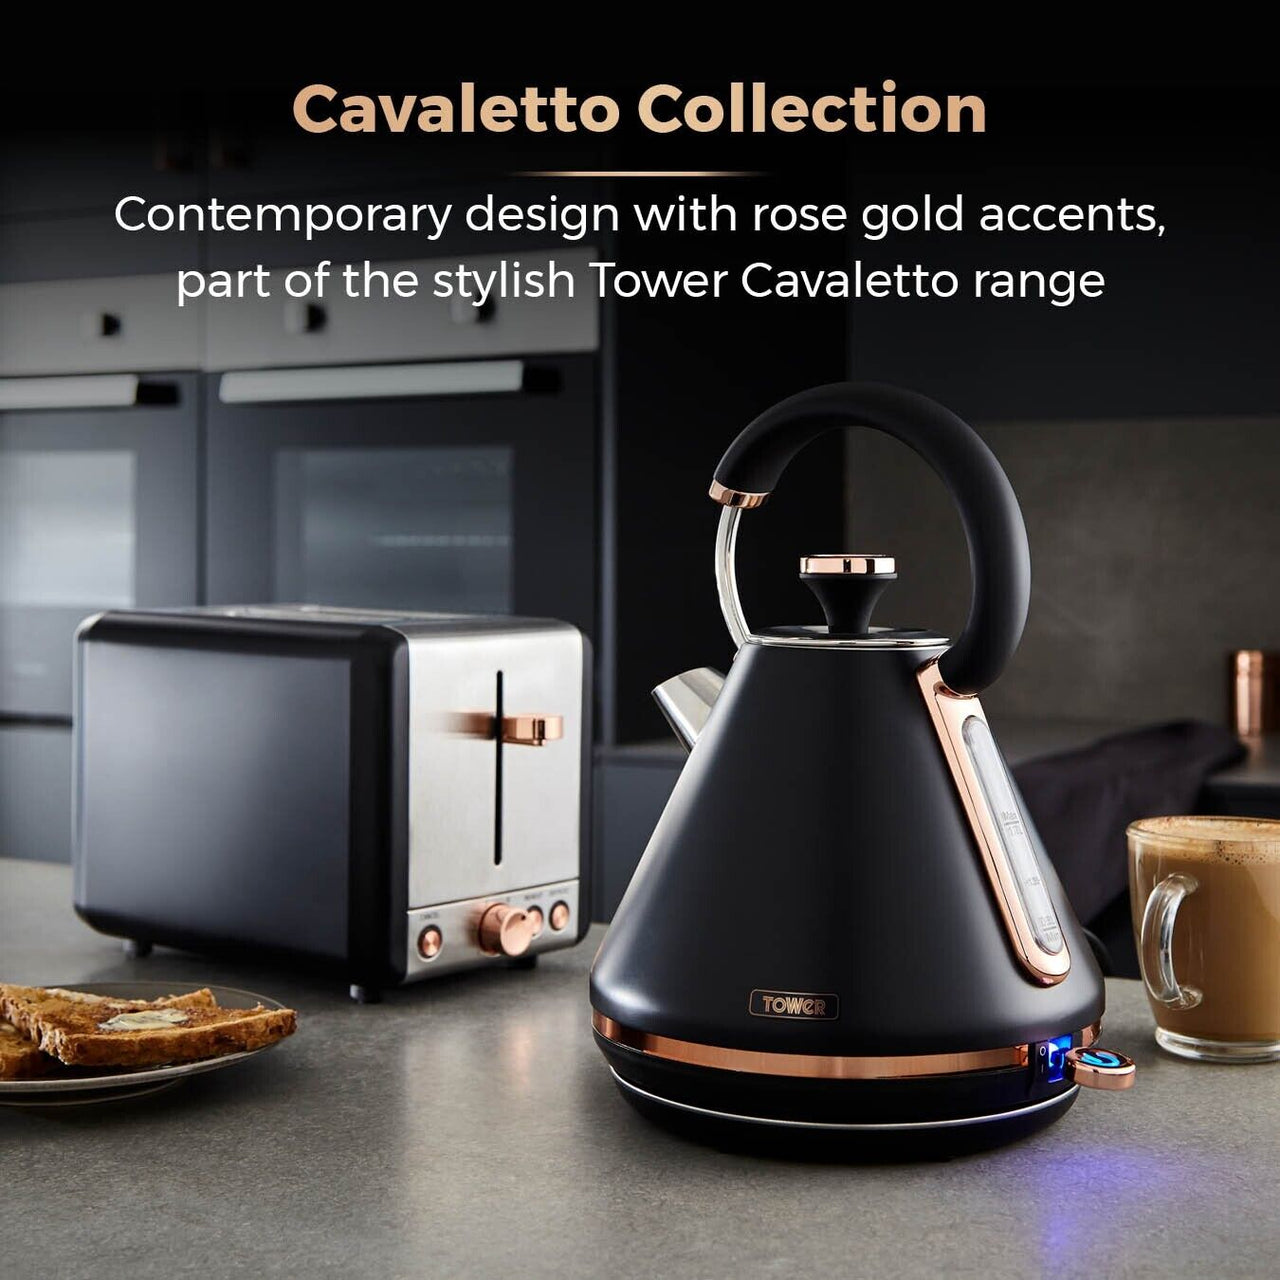 Tower Cavaletto Black Kettle 2 Slice Toaster Microwave Bread Bin & Canisters Set